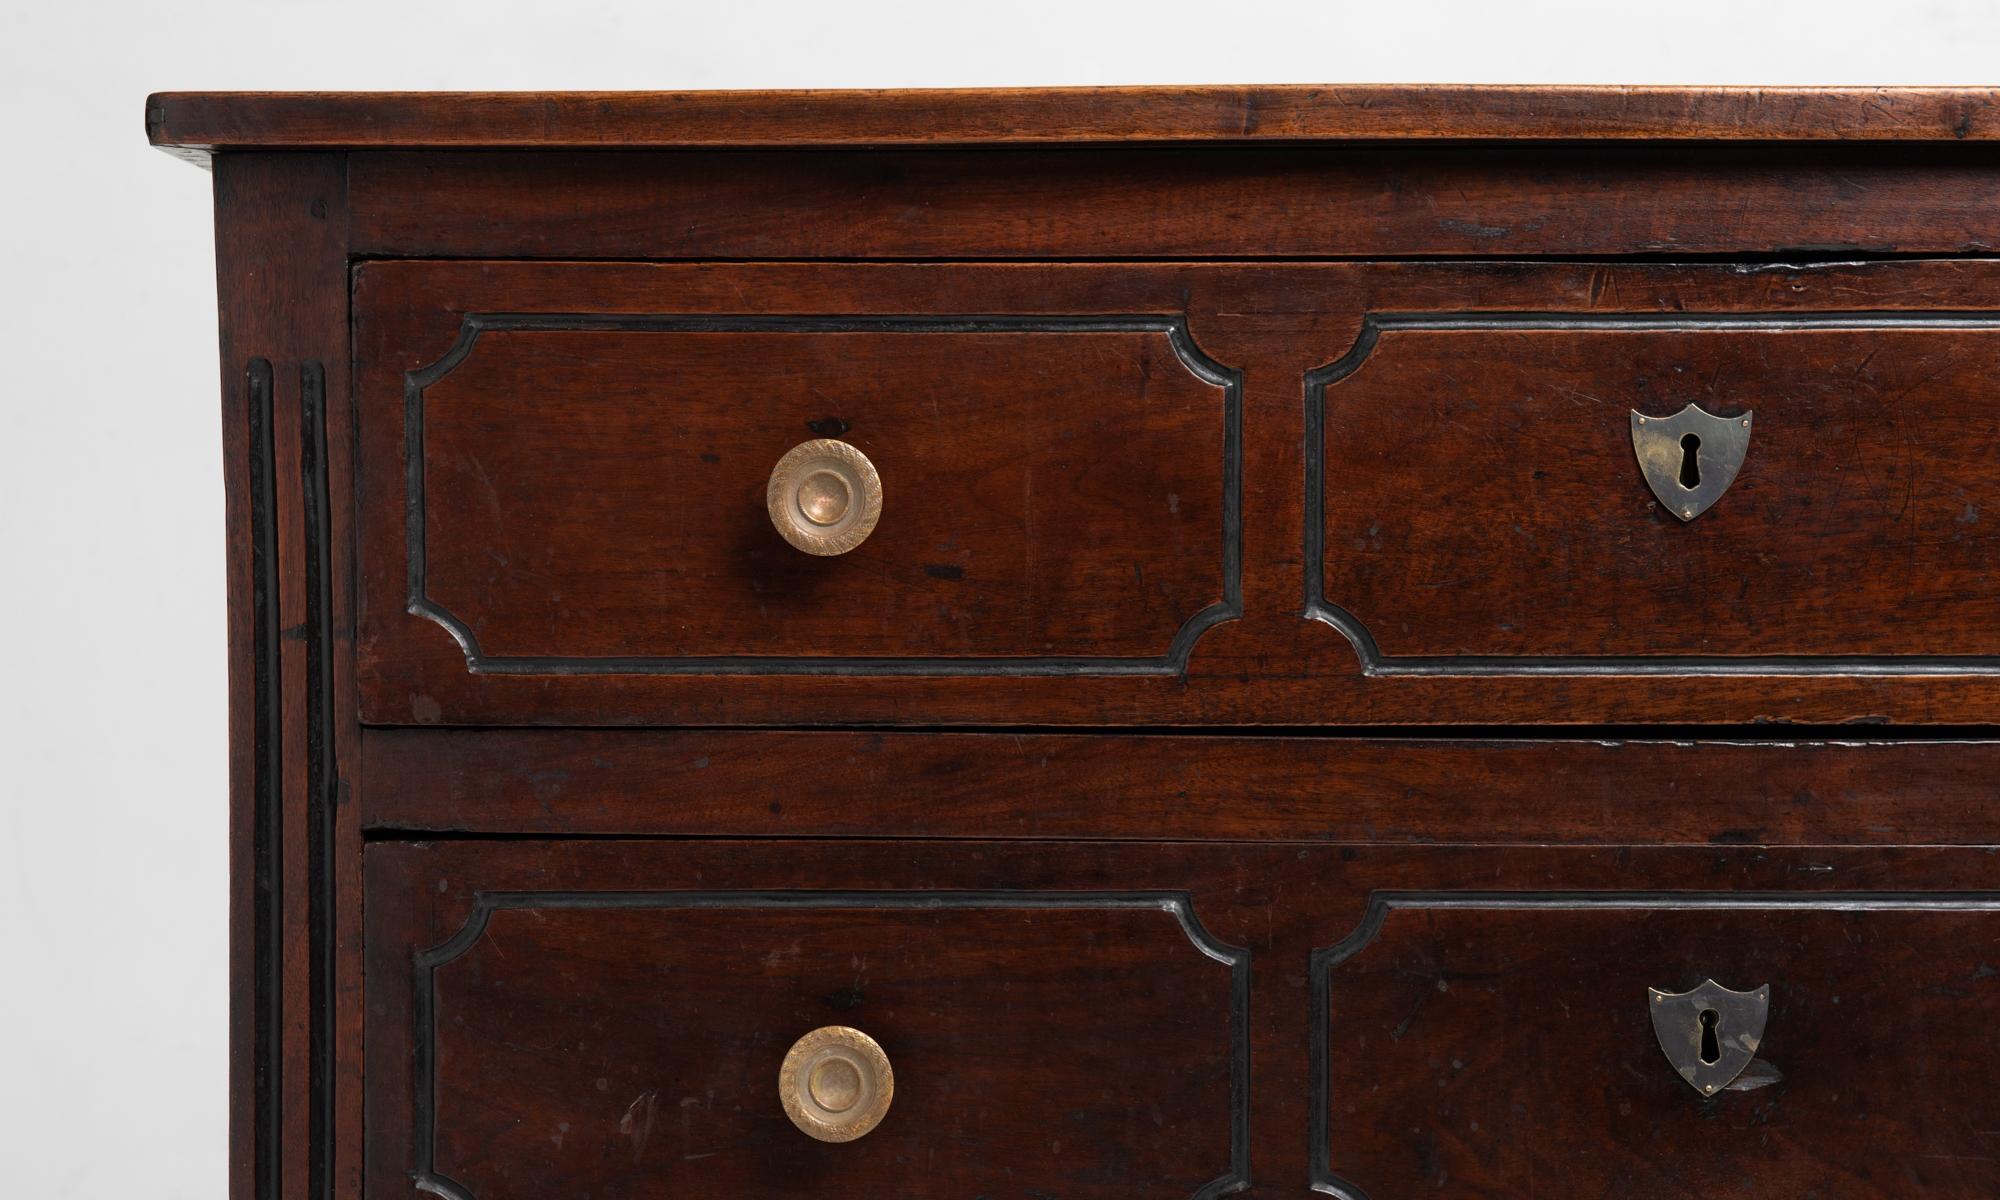 Hand-Crafted Walnut Commode, France, 18th Century